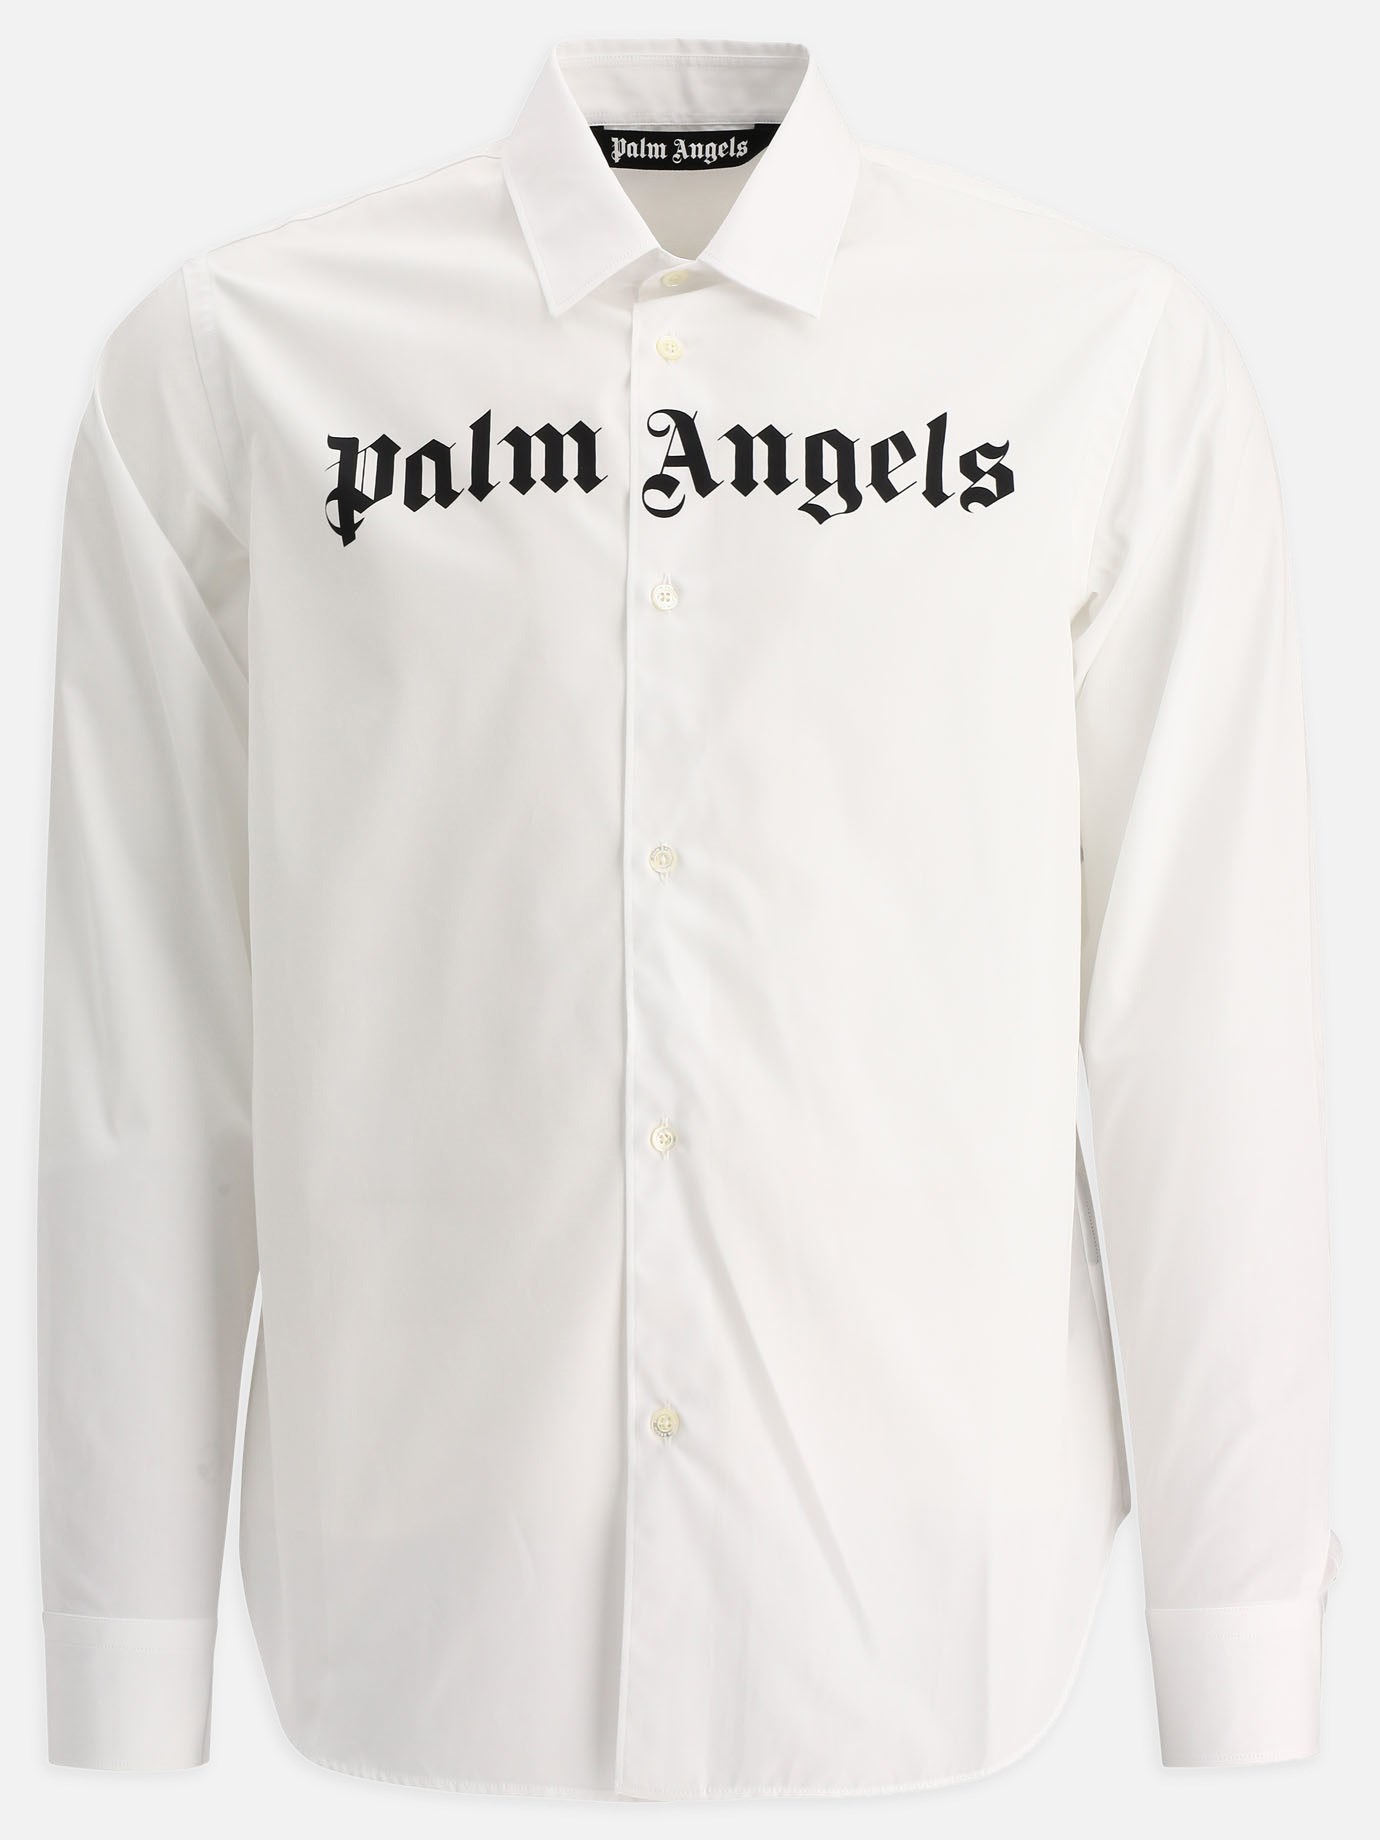  Classic Logo  shirt by Palm Angels